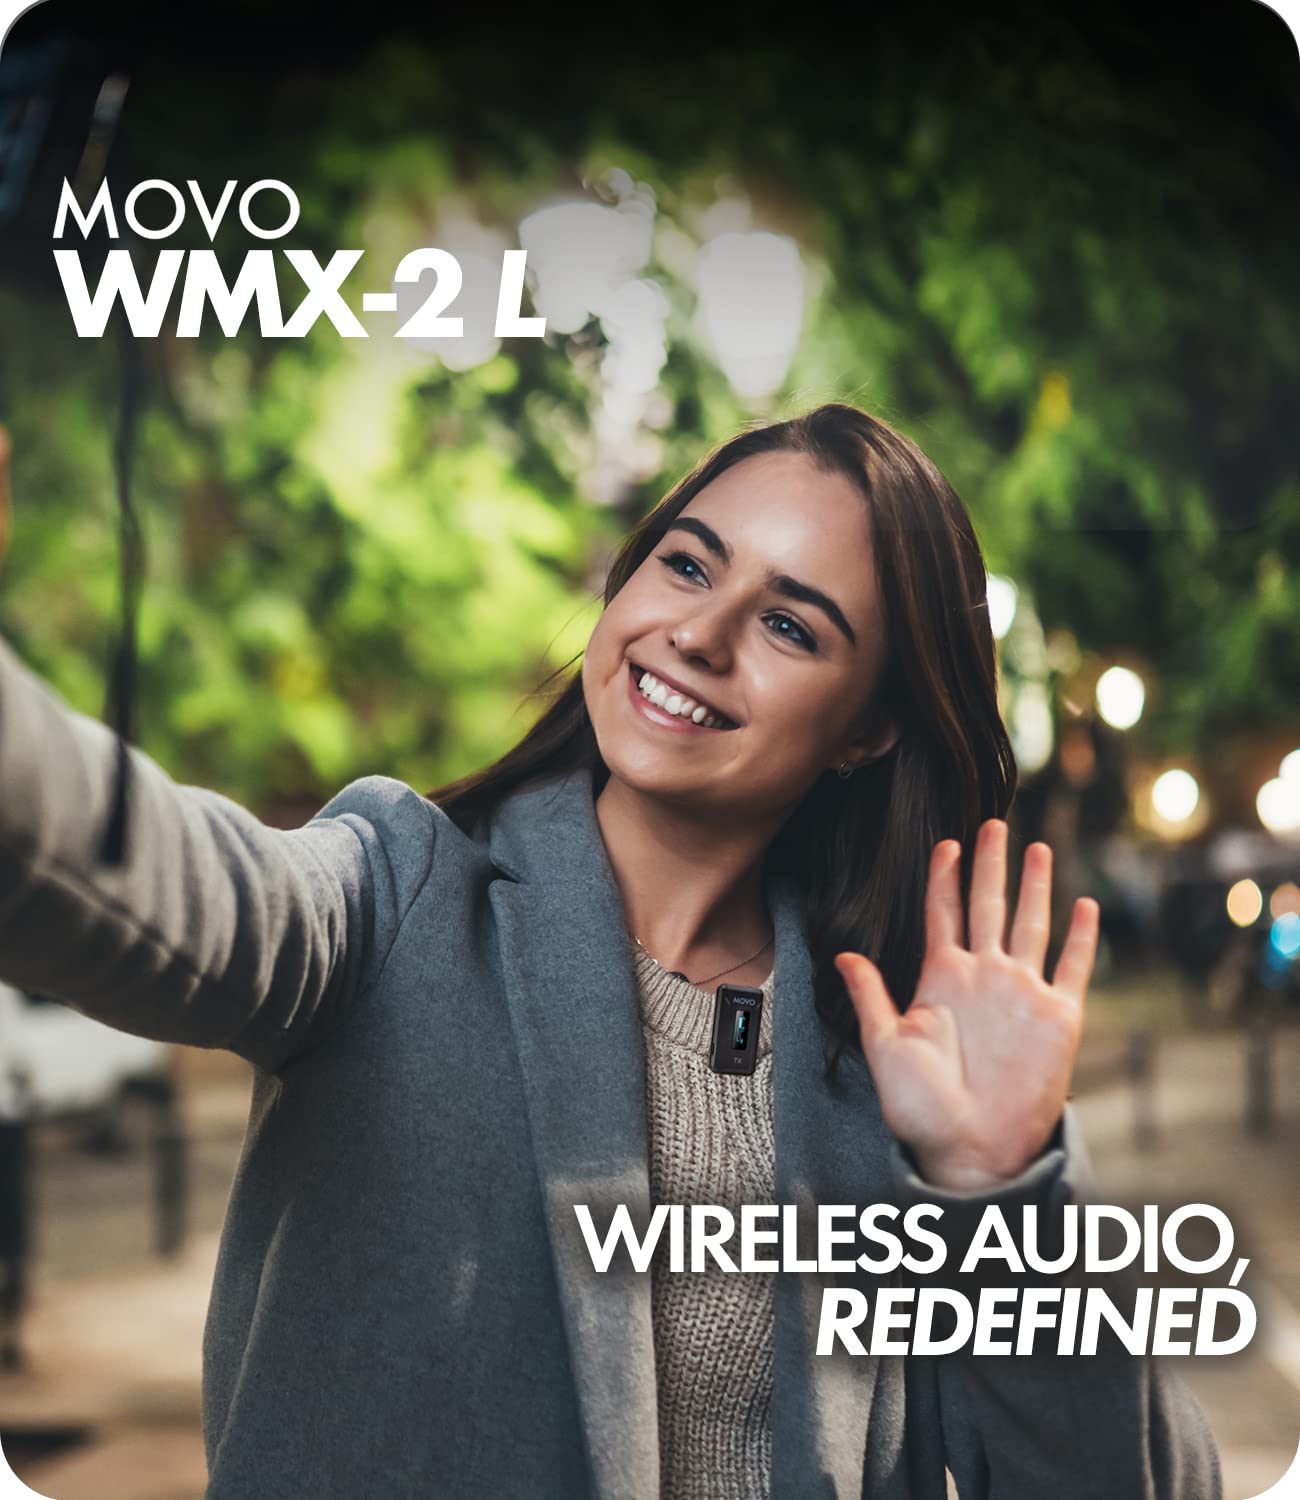 Movo WMX-2-L Wireless Microphone for iPhone with Charging Case - Lightning Microphone, Omnidirectional Mic, 328ft Range, 7hr Battery Life  - Very Good